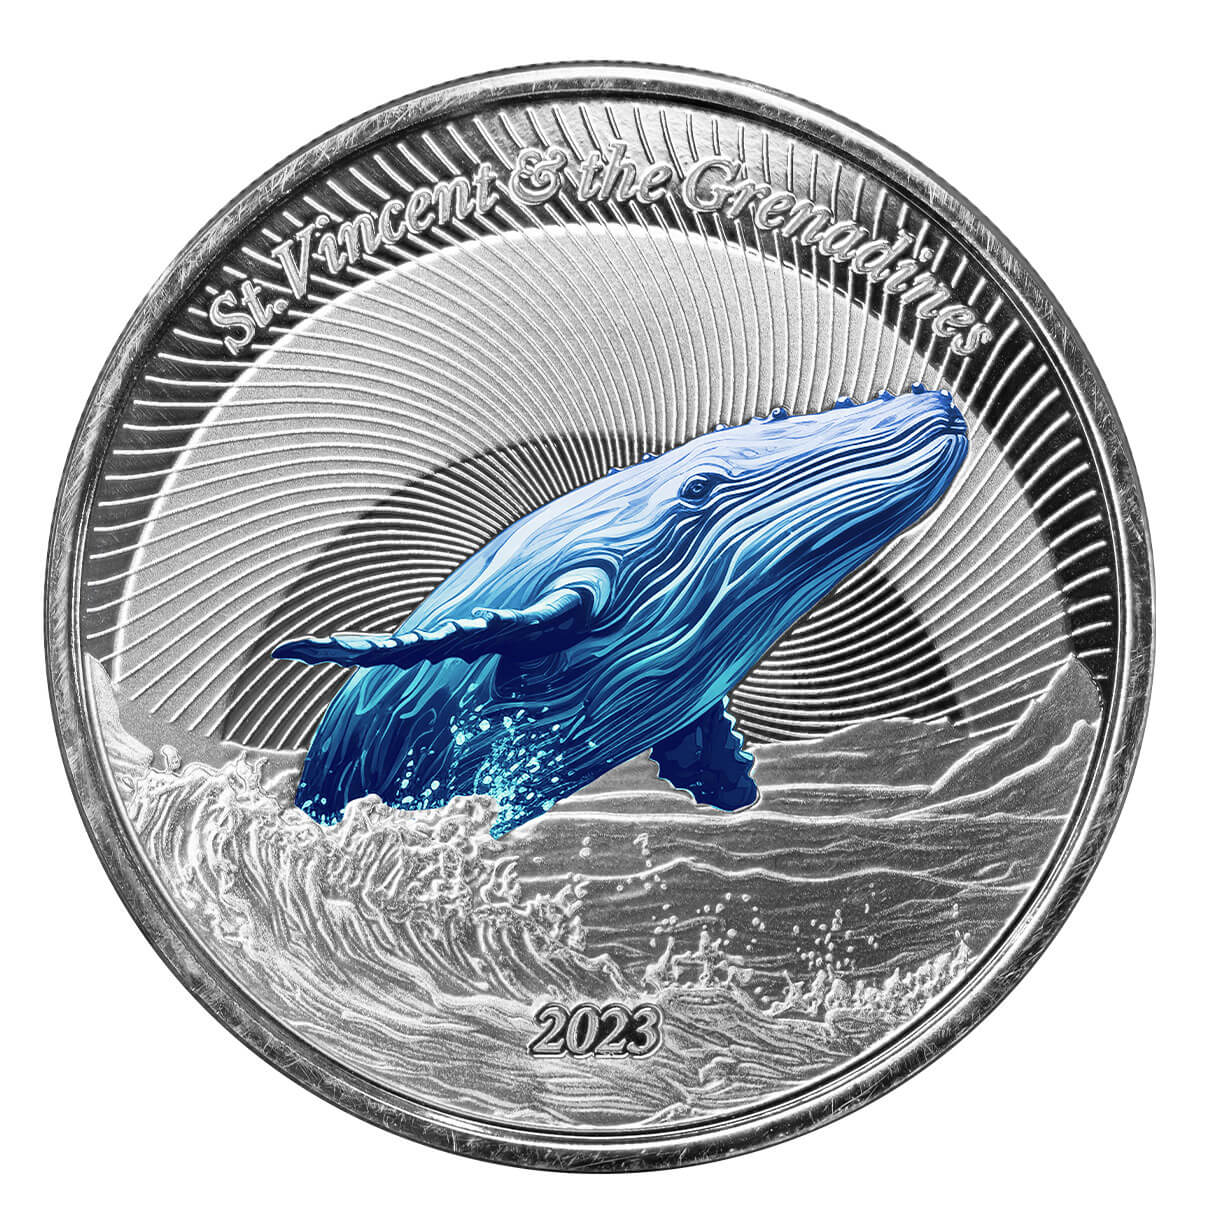 FIN WHALE Whales of the Southern Ocean 1 Oz Silver Coin 2